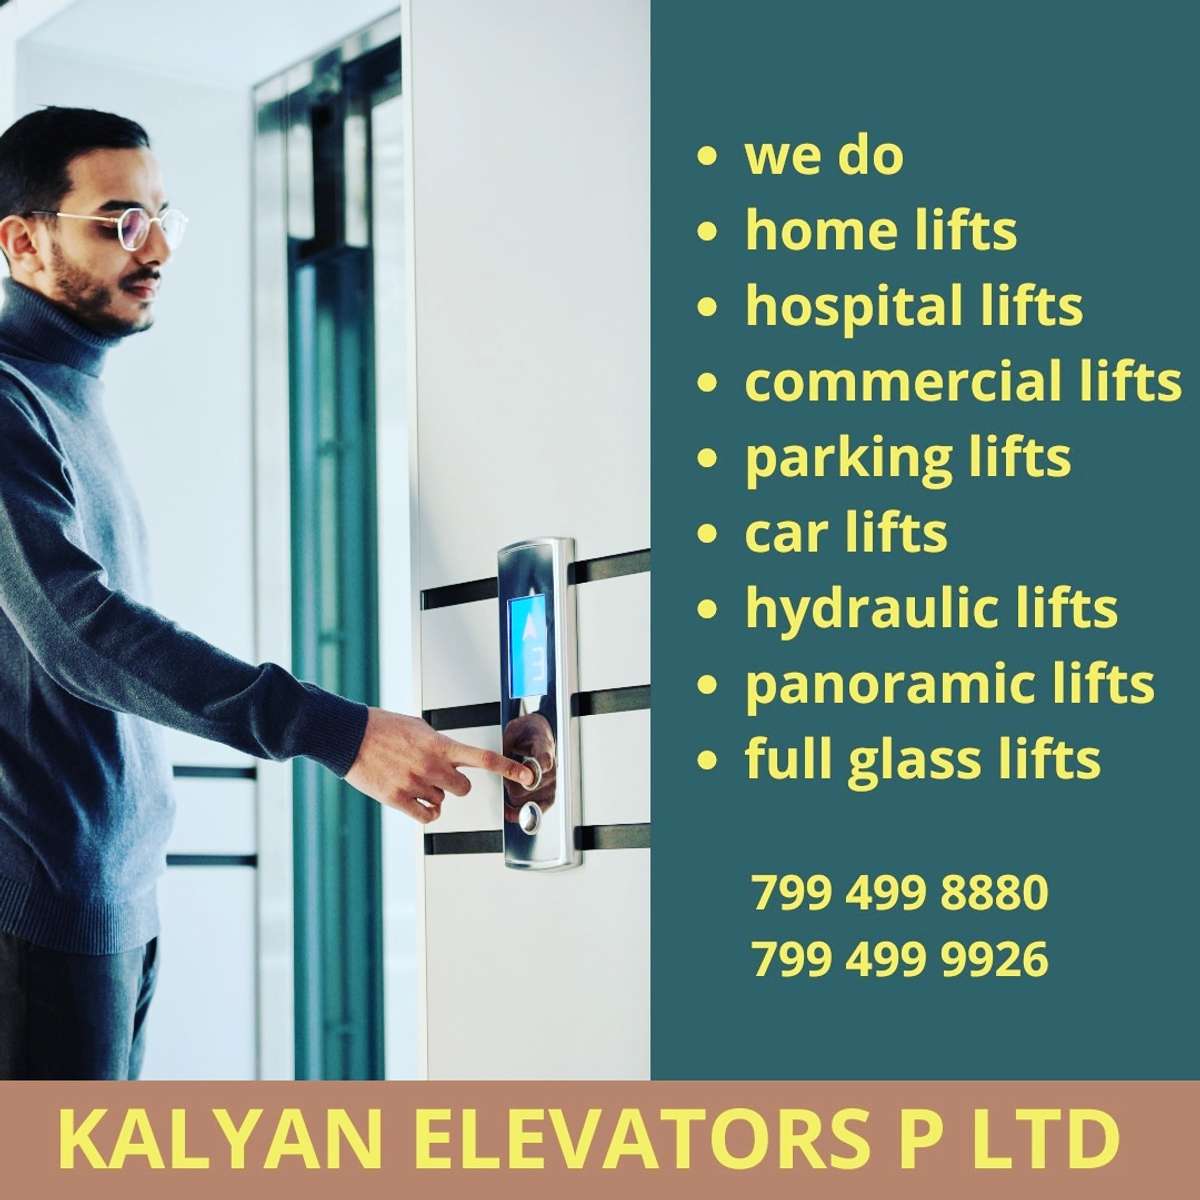 Kalyan Home Elevators offers the long-awaited solution to vertical mobility within homes at affordable prices and easy-to-use features. Our customized and aesthetically designed home lifts are easily installable in preexisting homes as well as houses under construction, and help you relieve the headache of climbing. More details:- call 

we do all kind of :-
Home Lifts
Hospital Lifts
Capsule Lifts
Commercial Lifts
Customised Passenger Lifts
Car Lifts
Parking Lifts